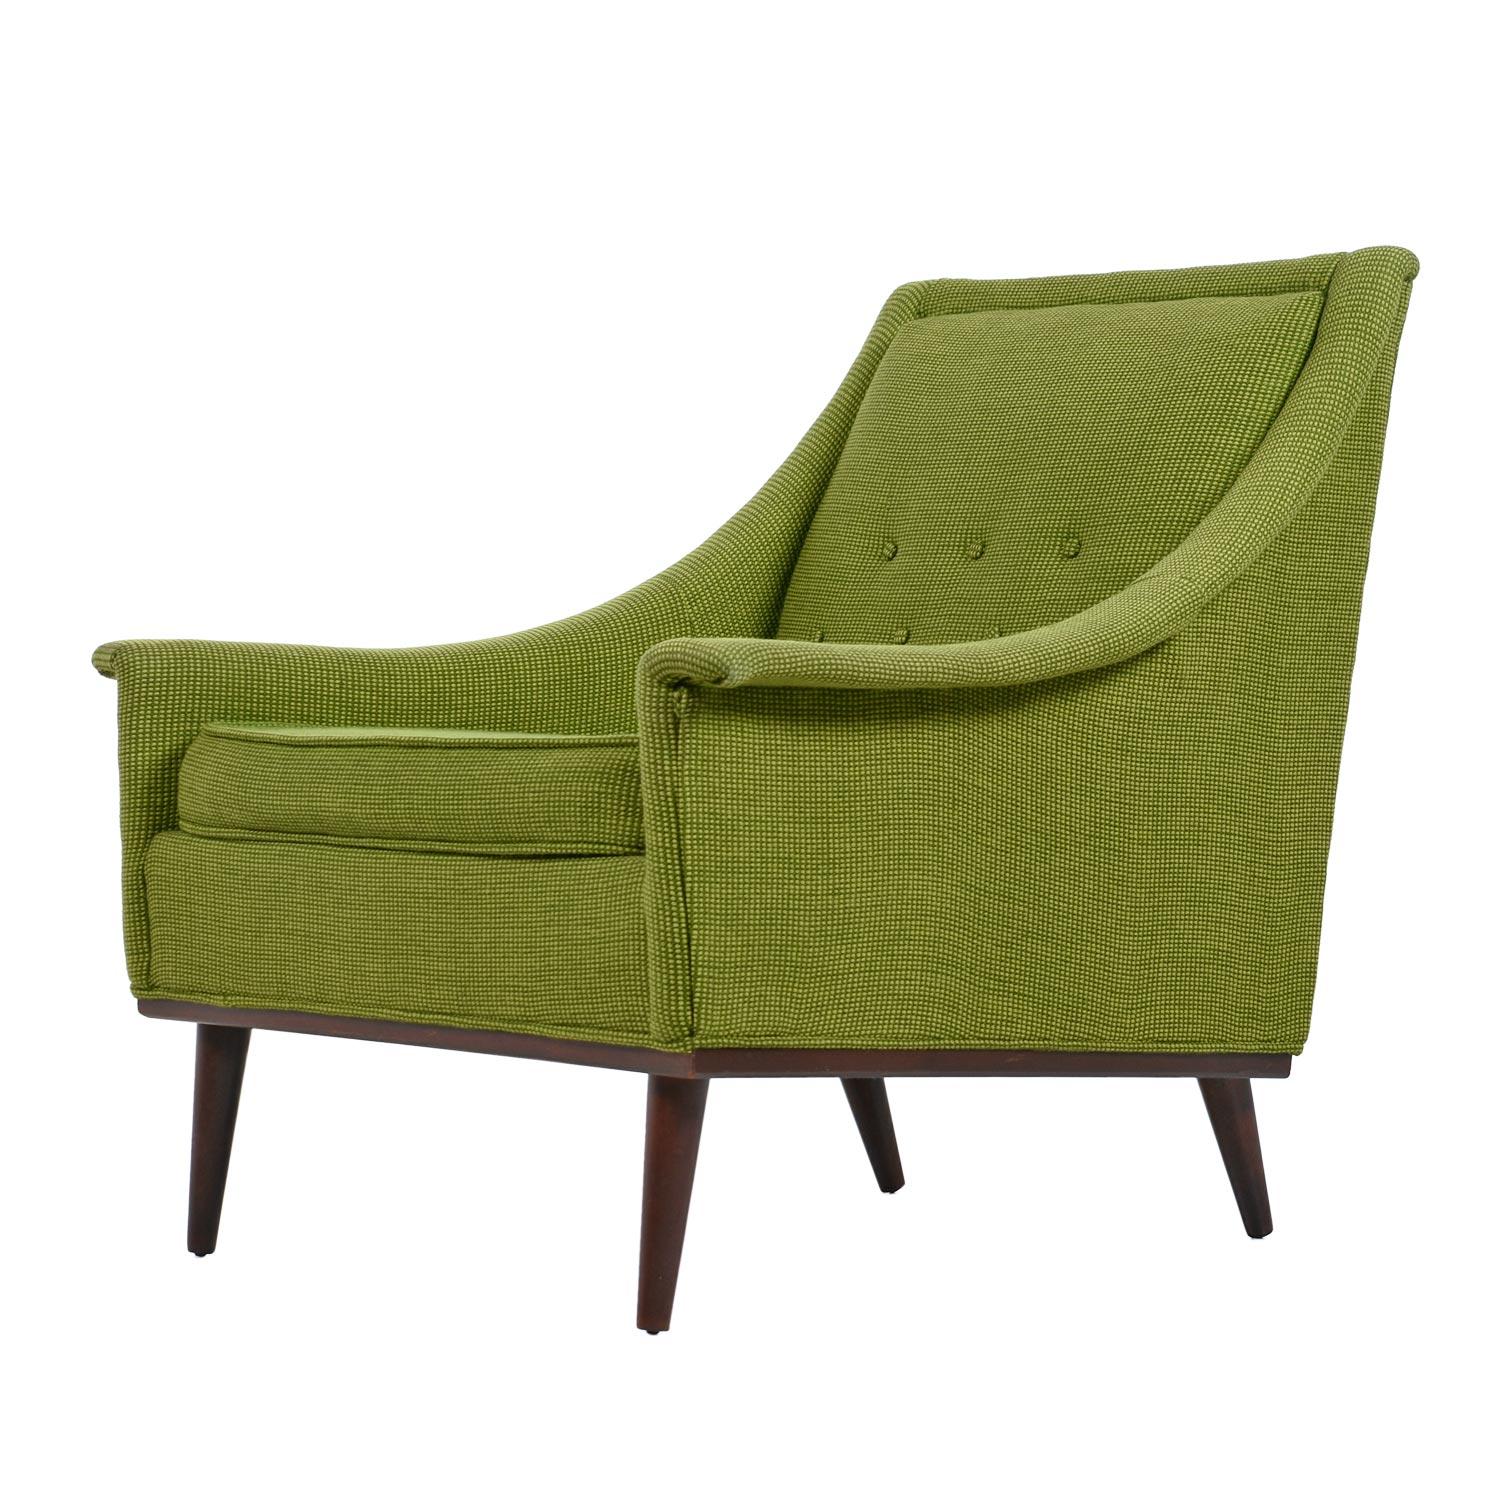 Mid-Century Modern Vintage Original Two-Tone Green Tweed Tufted Lounge Chairs by Selig, circa 1960s